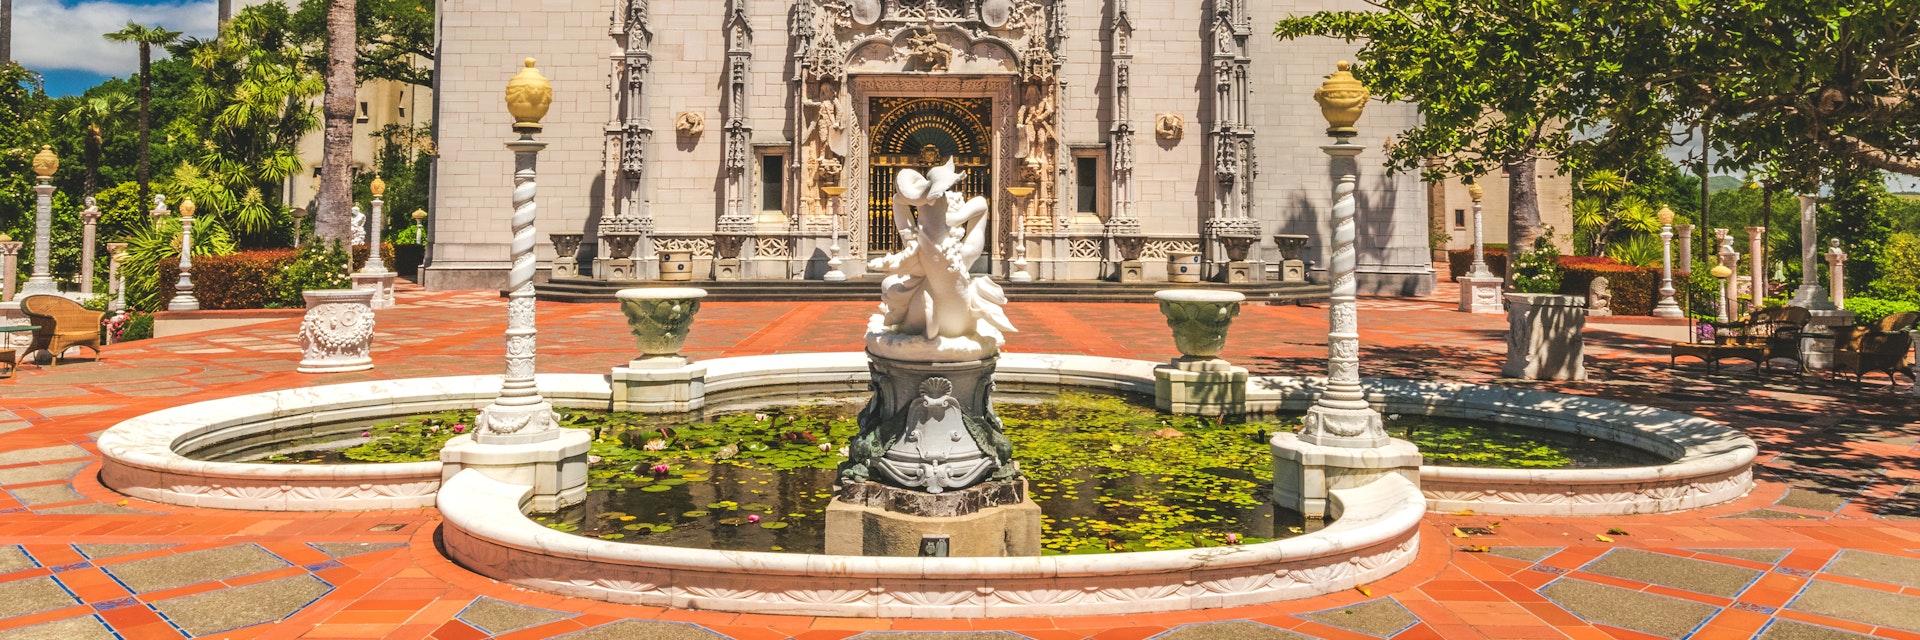 San Simeon, California / USA - May 12, 2018: Exterior view of Hearst Castle, William Randolph Hearst's extravagant coastal hilltop estate designed by architect Julia Morgan over 28 years.; Shutterstock ID 1297759909; your: Meghan O'Dea; gl: 65050; netsuite: Online Editorial; full: POI